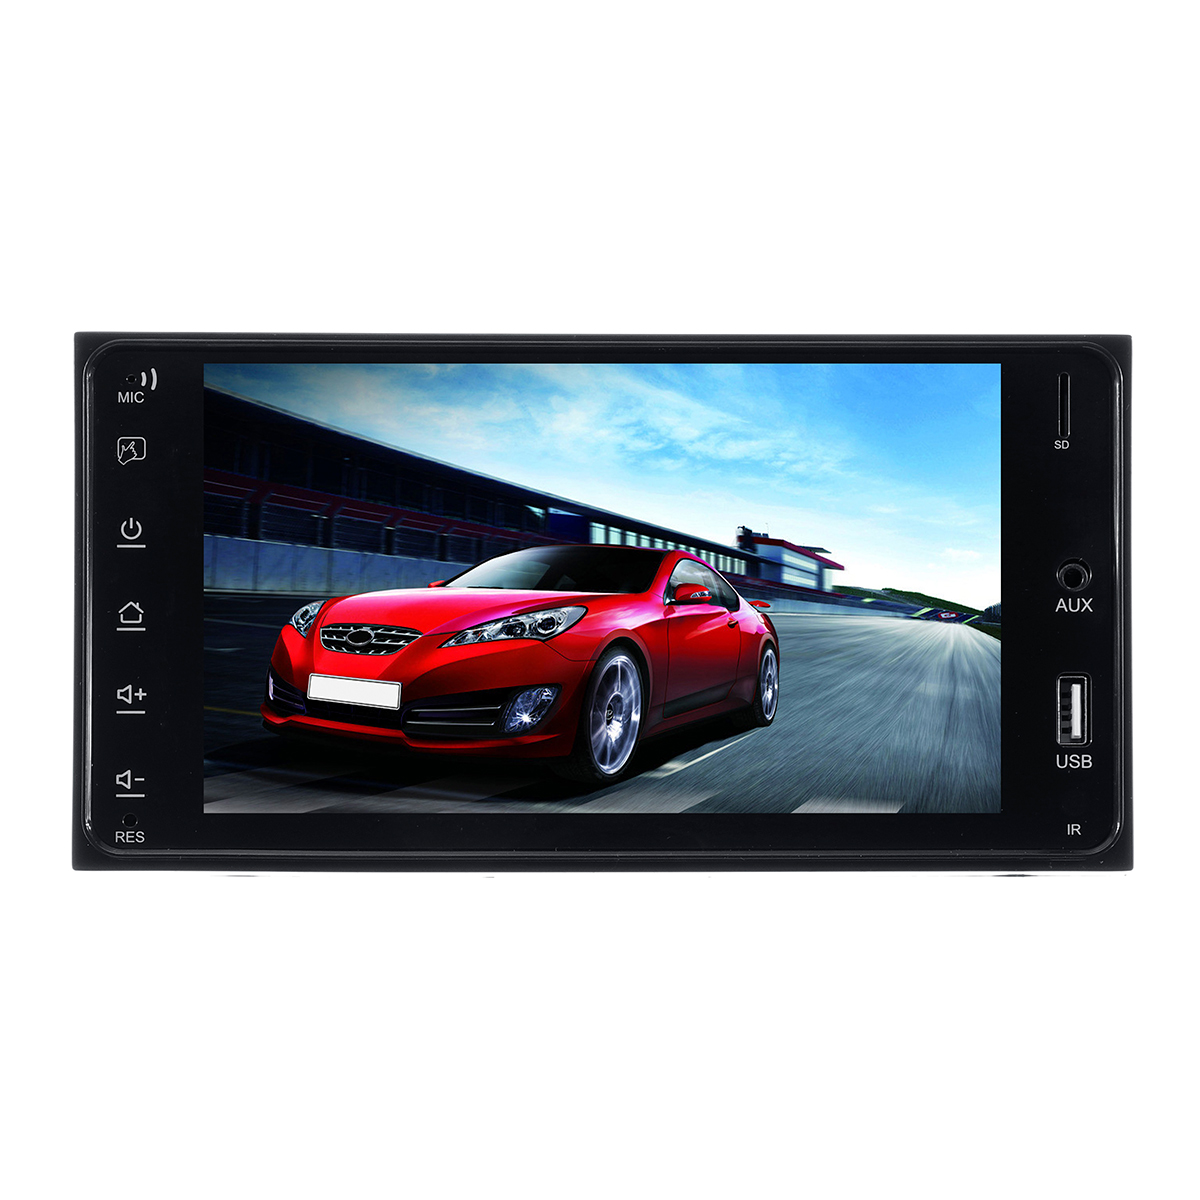 

7 Inch 2 Din for Android 8.1 Car MP5 Player 1+16G IPS Stereo Radio GPS AM WIFI for Toyota Corolla Hilux RAV4